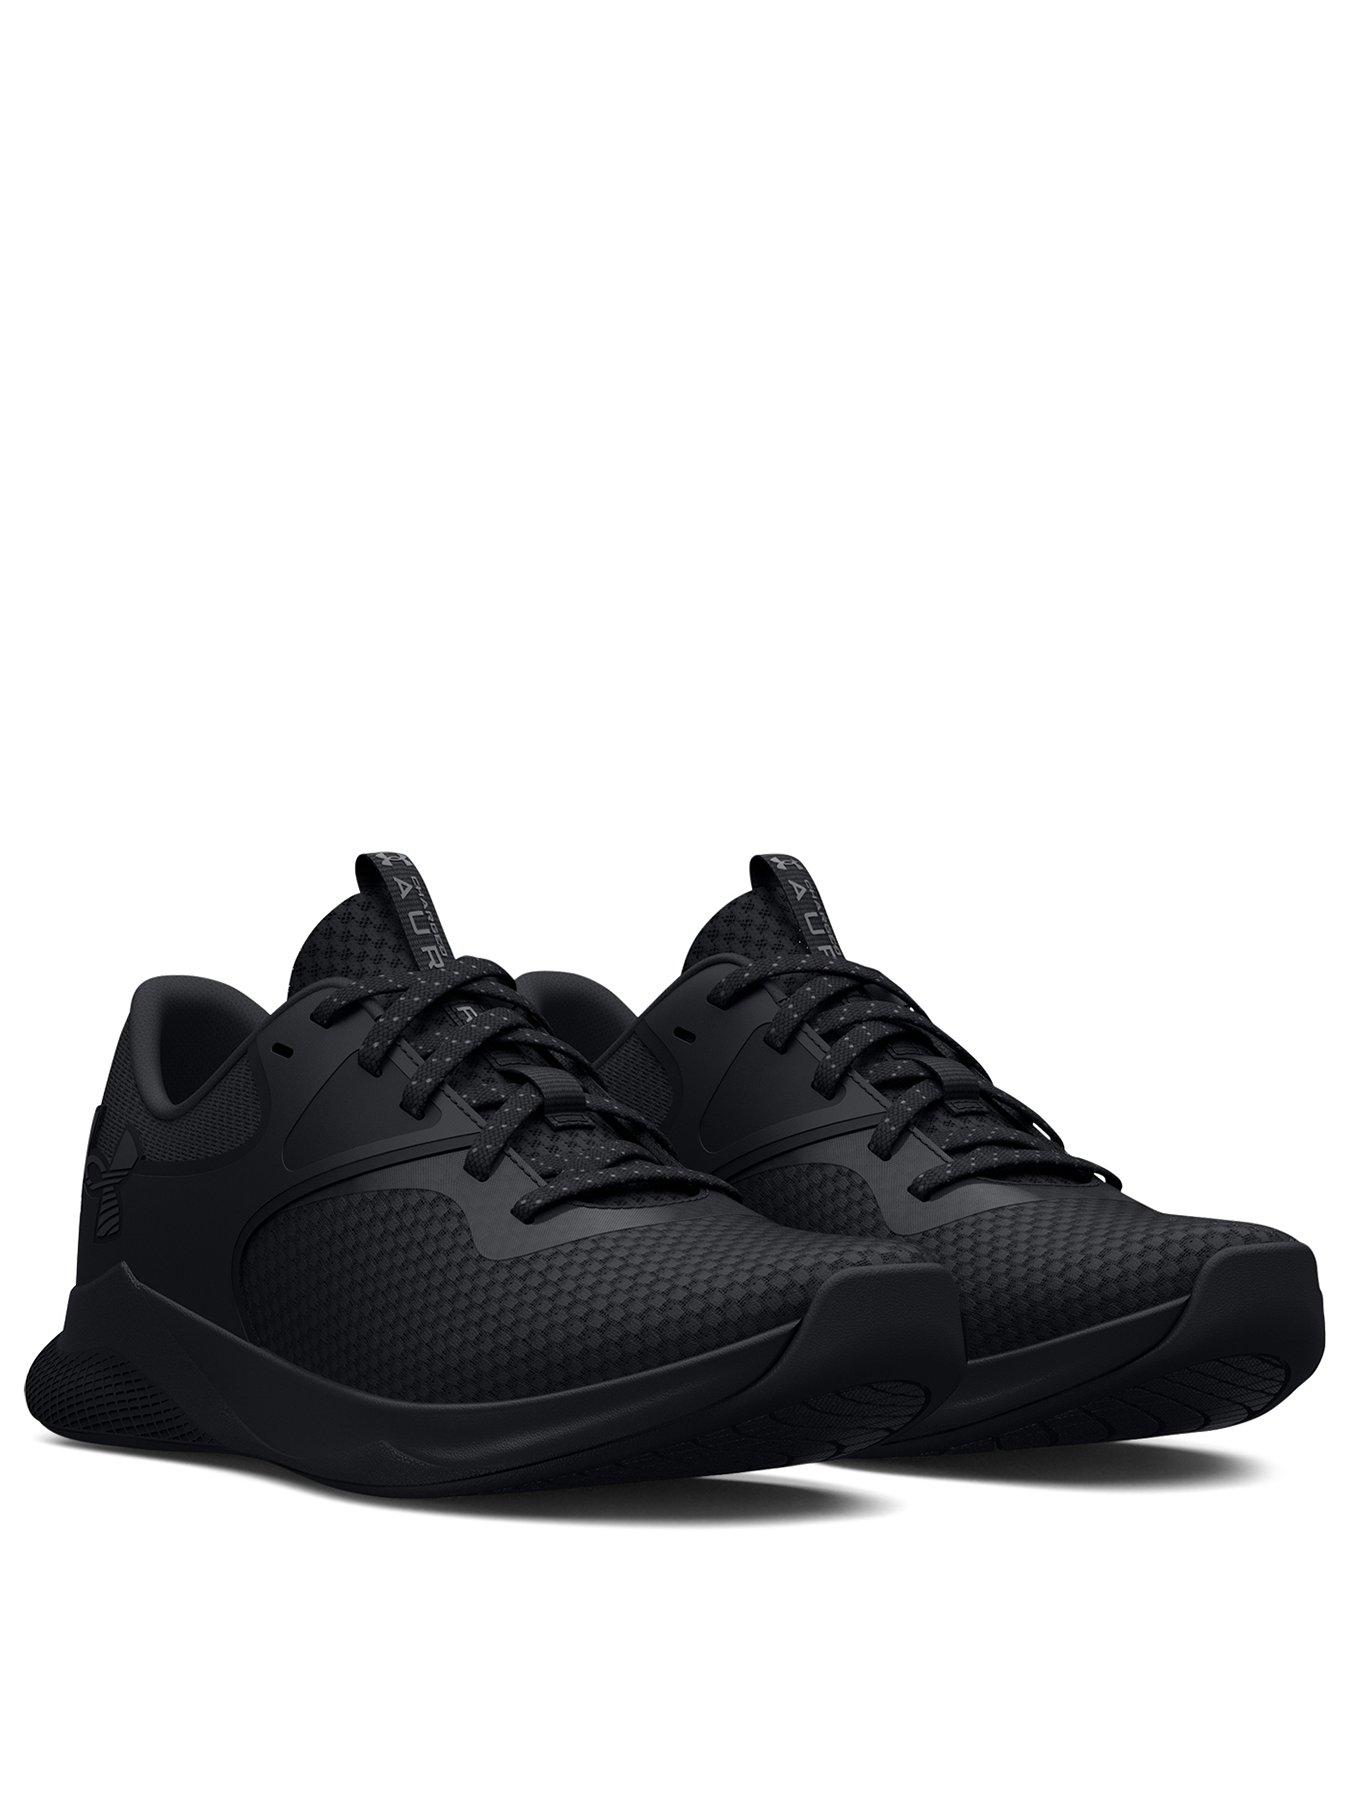 UNDER ARMOUR Charged Aurora 2 - Black | very.co.uk